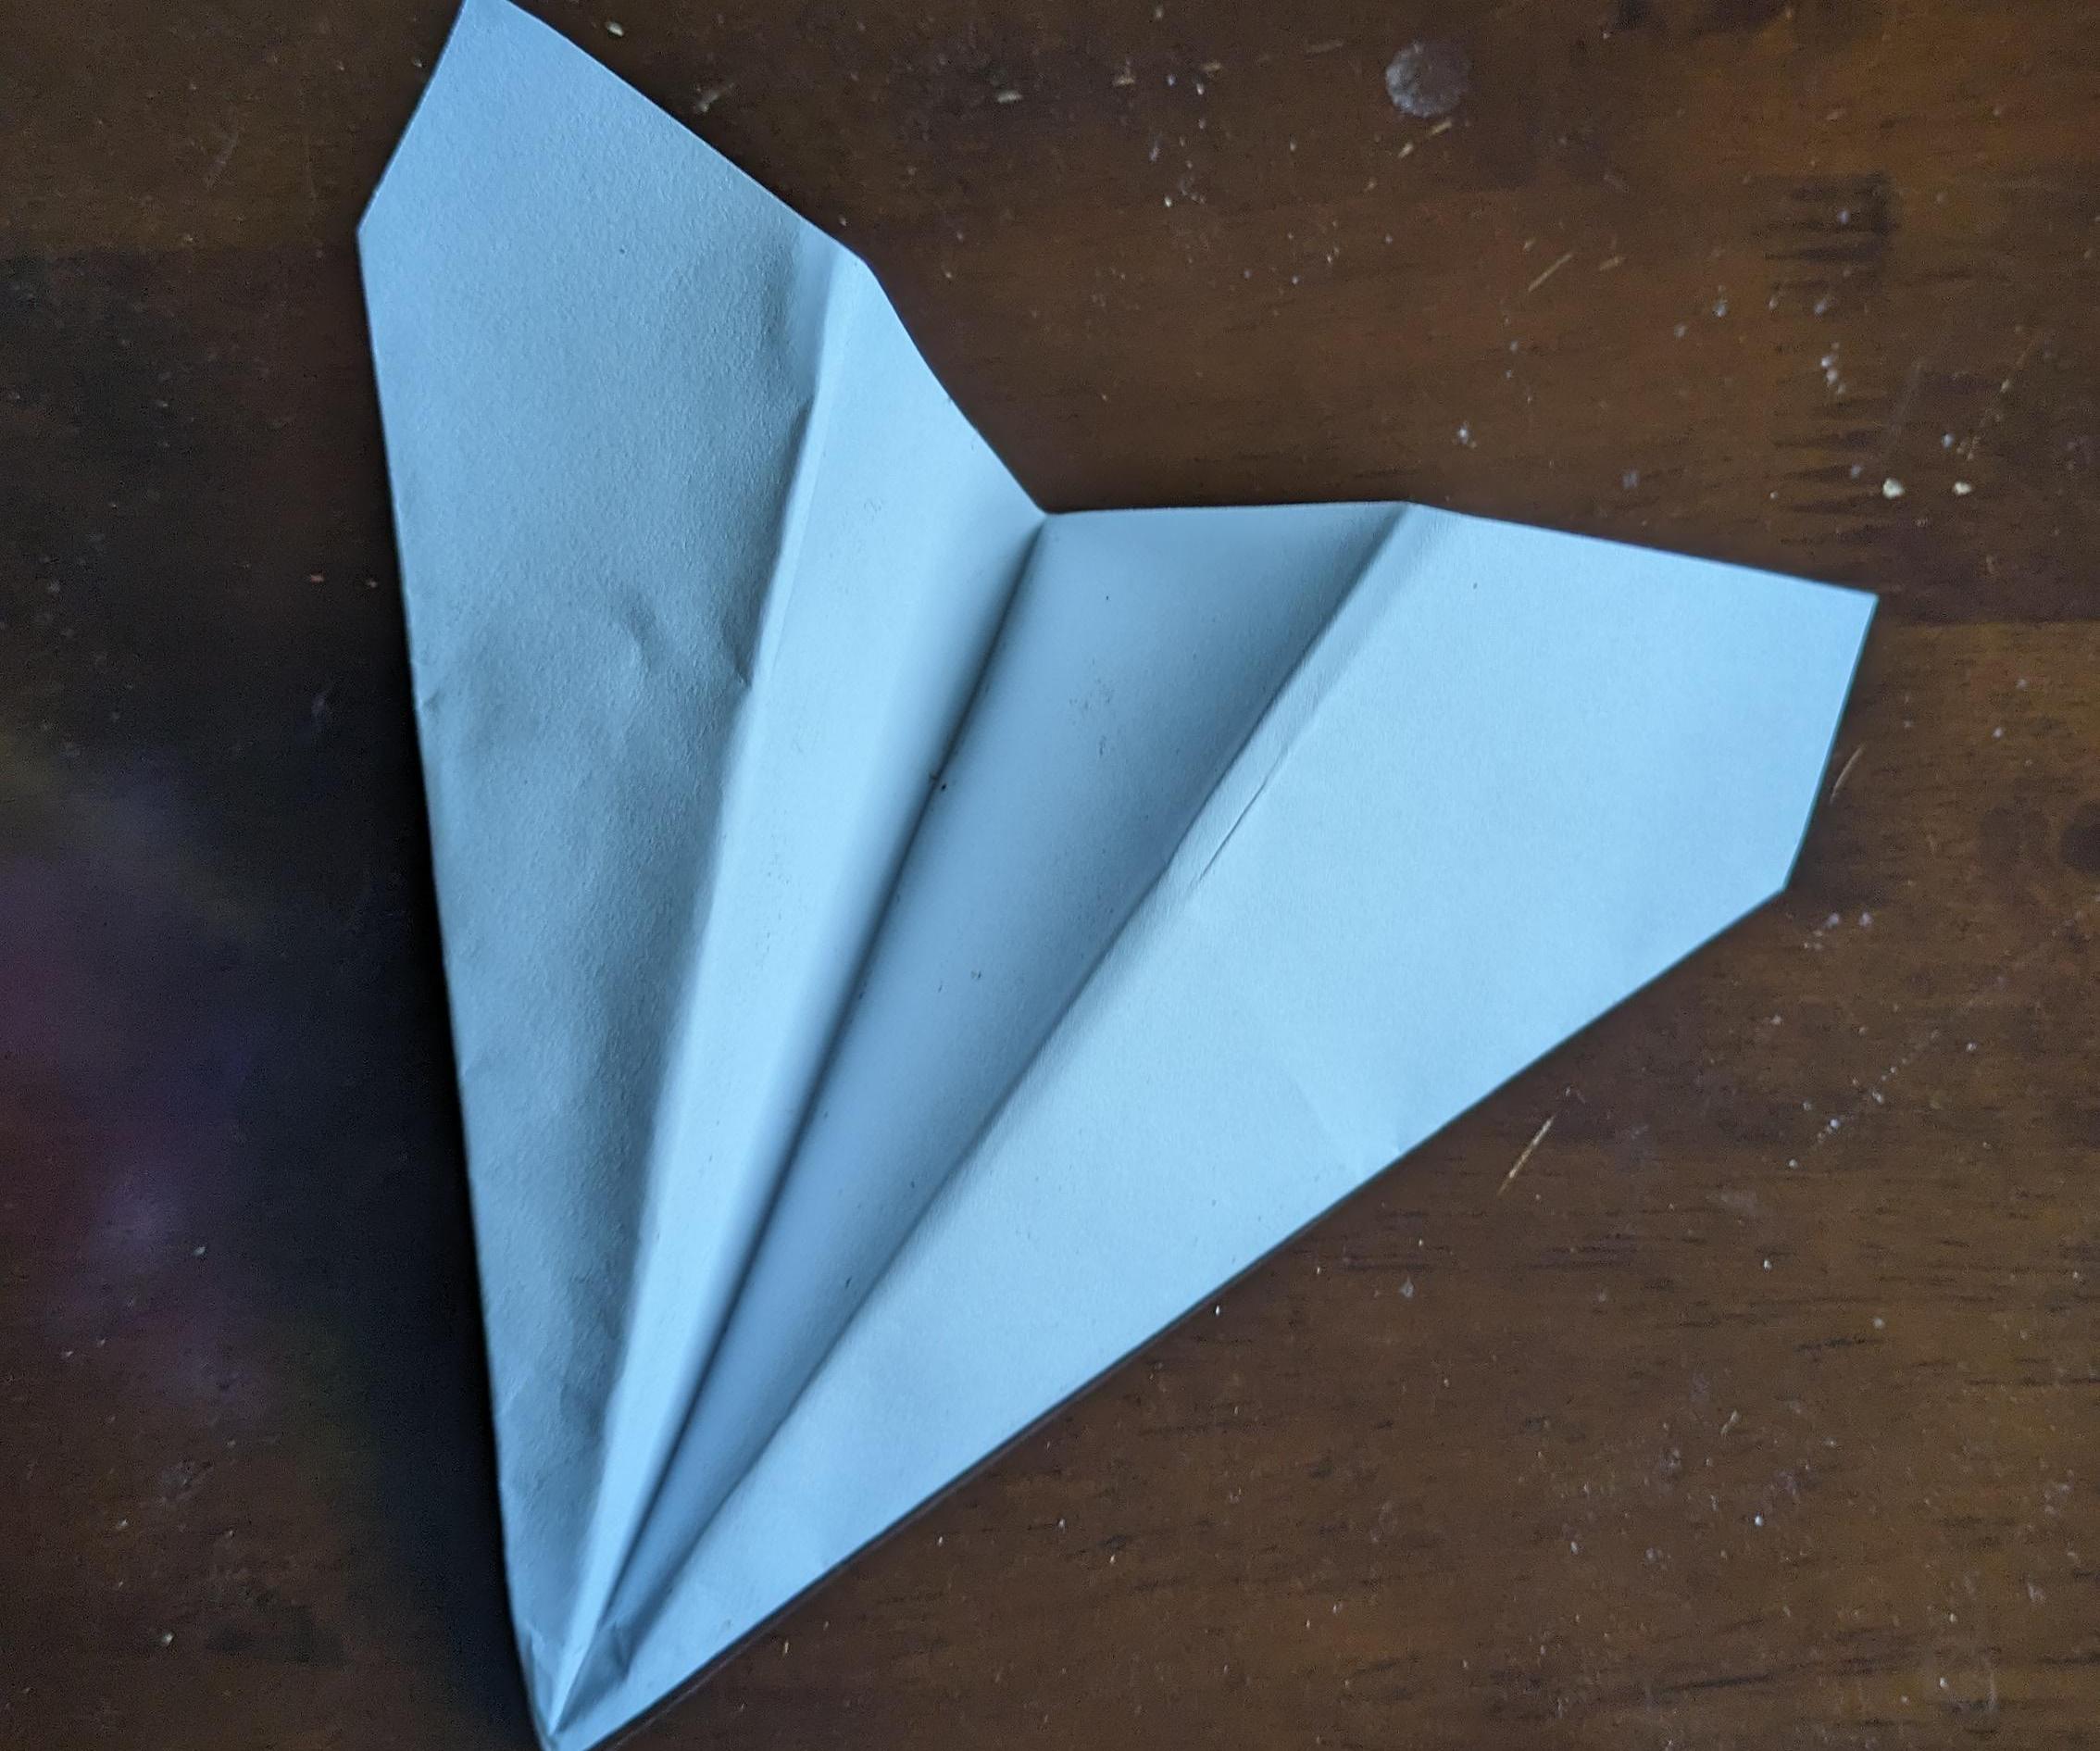 Best Paper Airplane Ever (Flies Like a Beauty!)